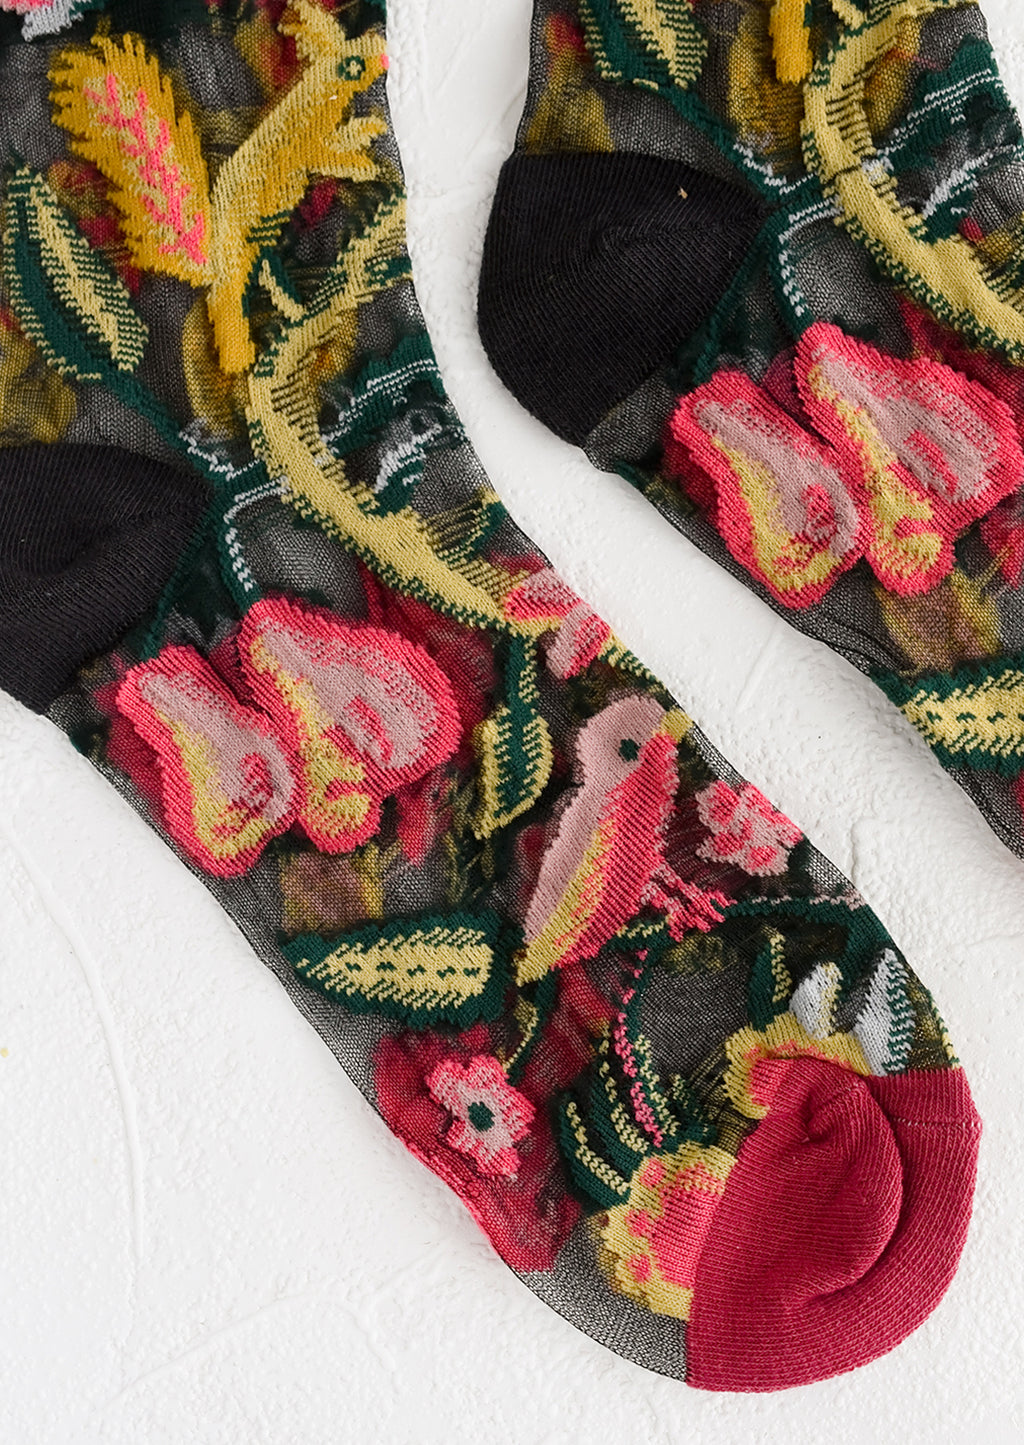 2: A pair of sheer black socks with multicolor creature print.